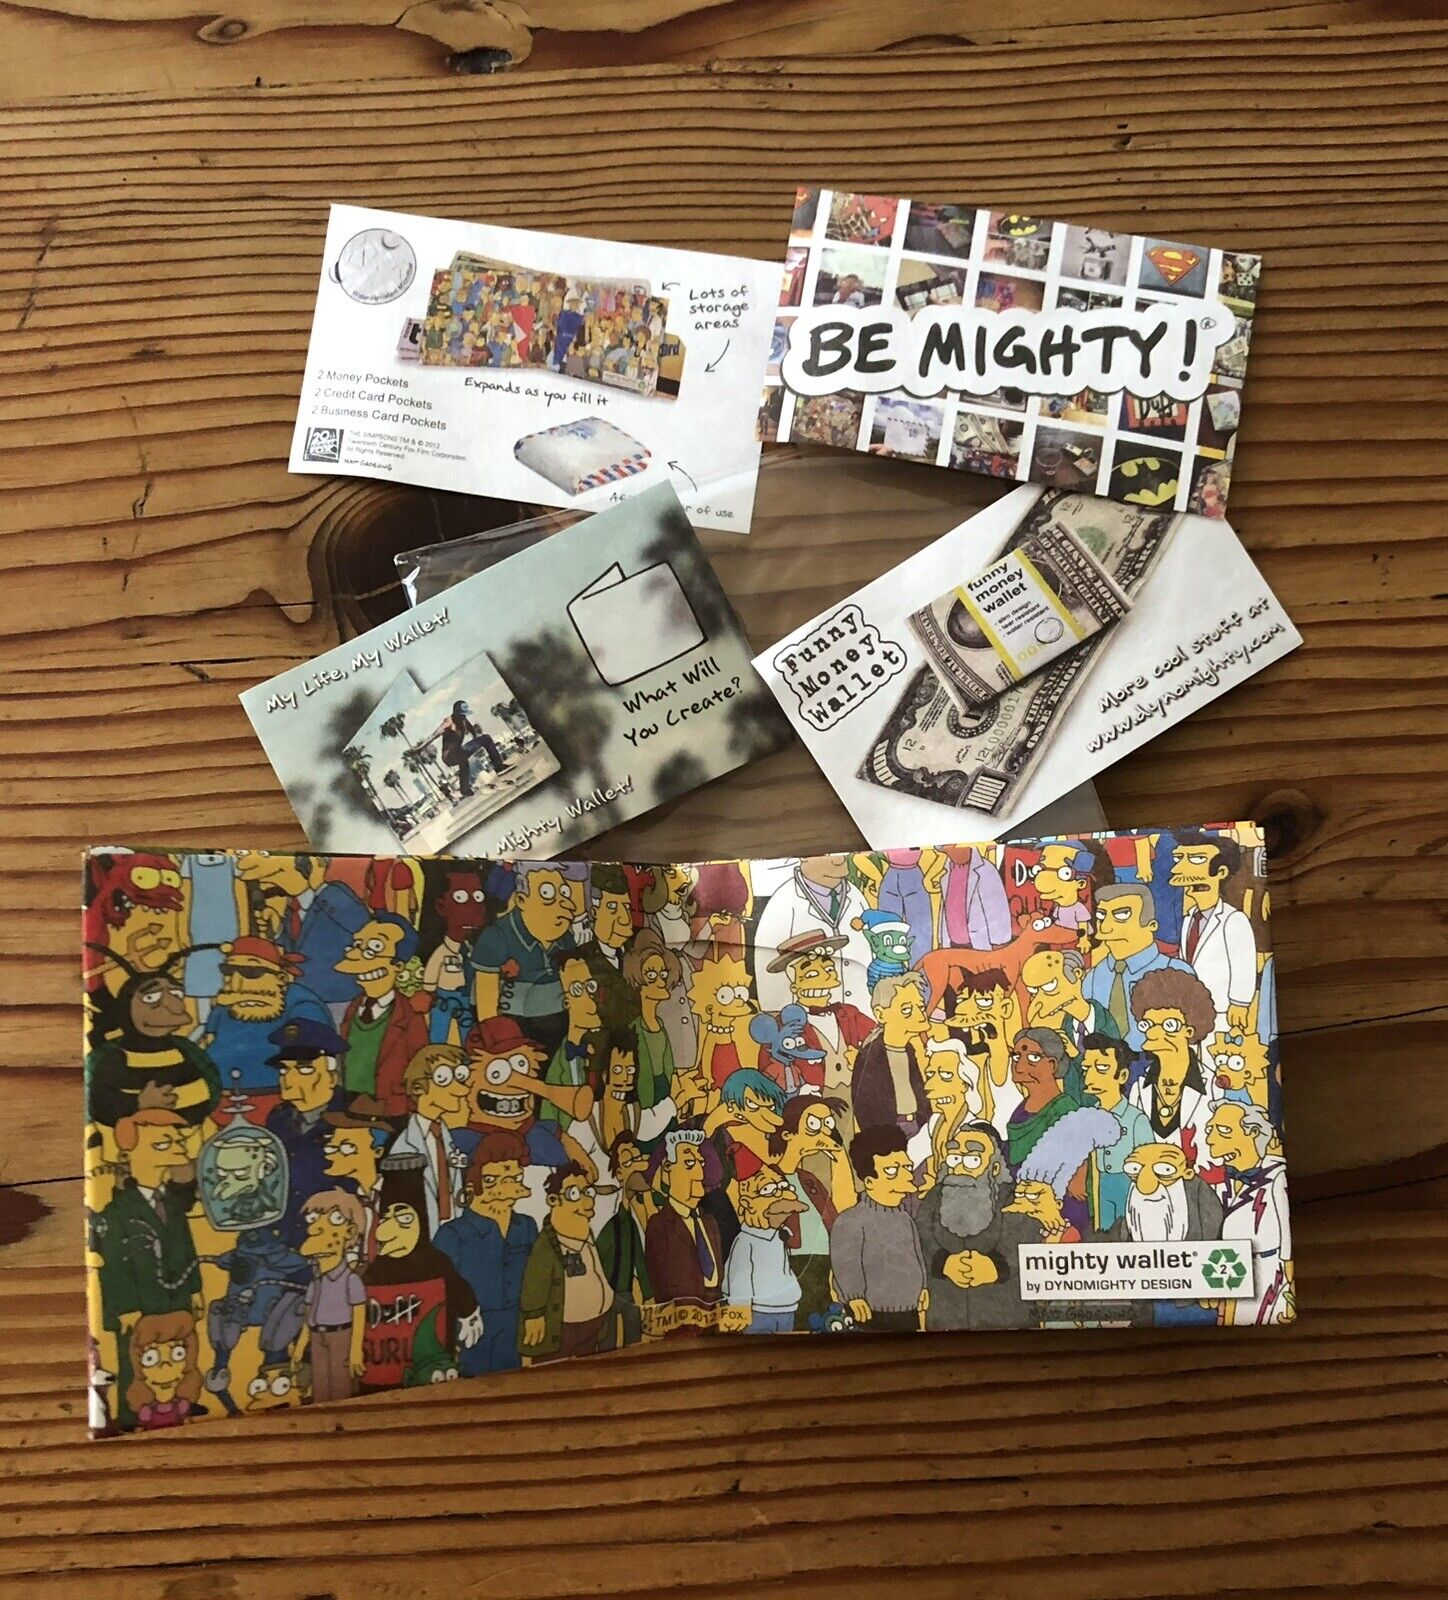 New The Simpsons Mighty Wallet By Dynomighty Design - Tyvk Paper Matt Groening